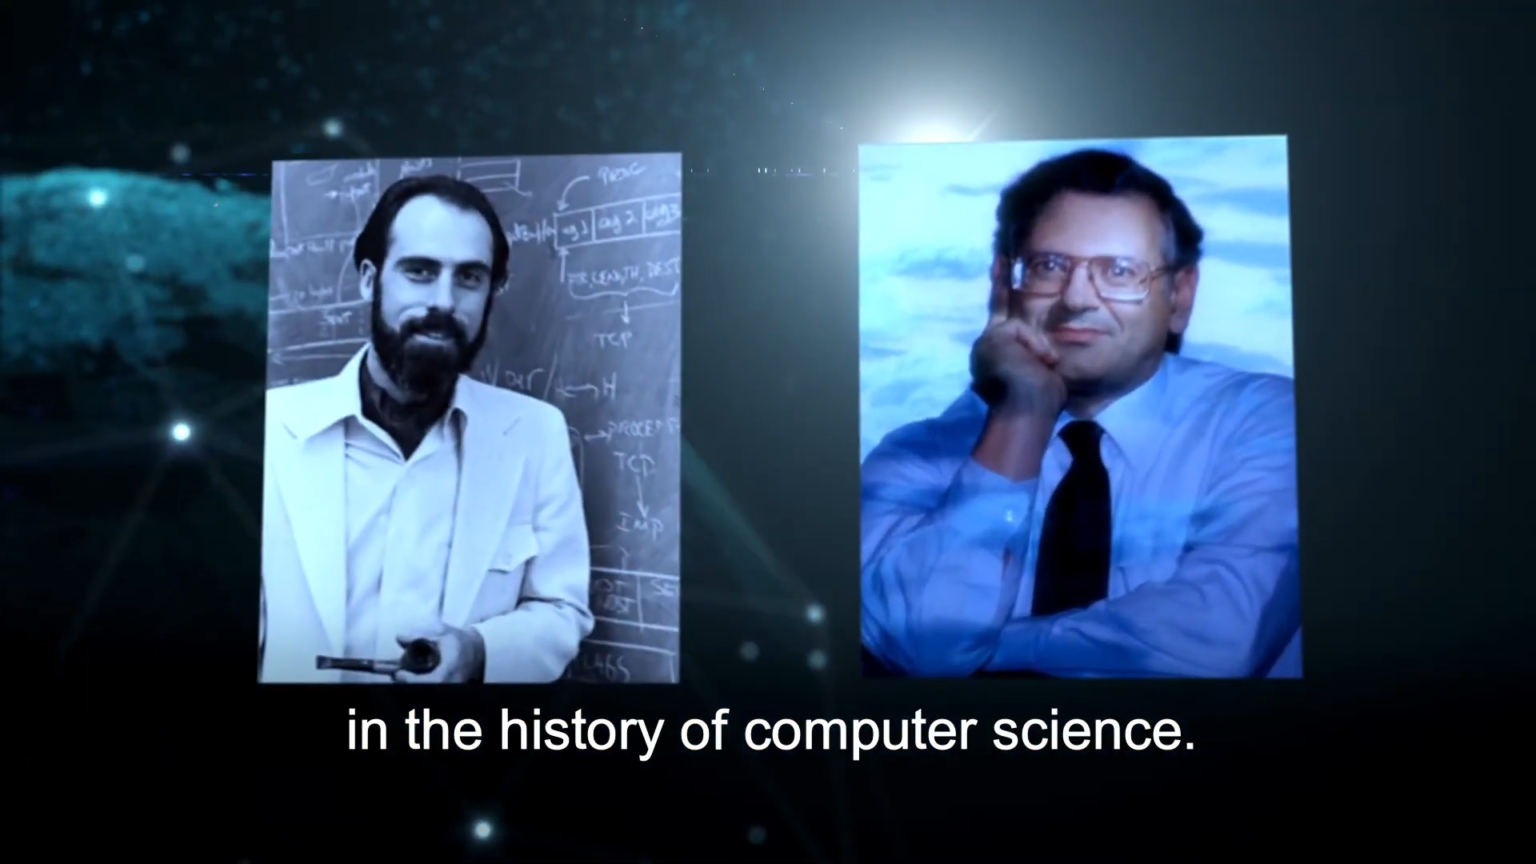 Vinton Cerf and Robert E. Kahn: Architects of TCP/IP – Pioneers in ...